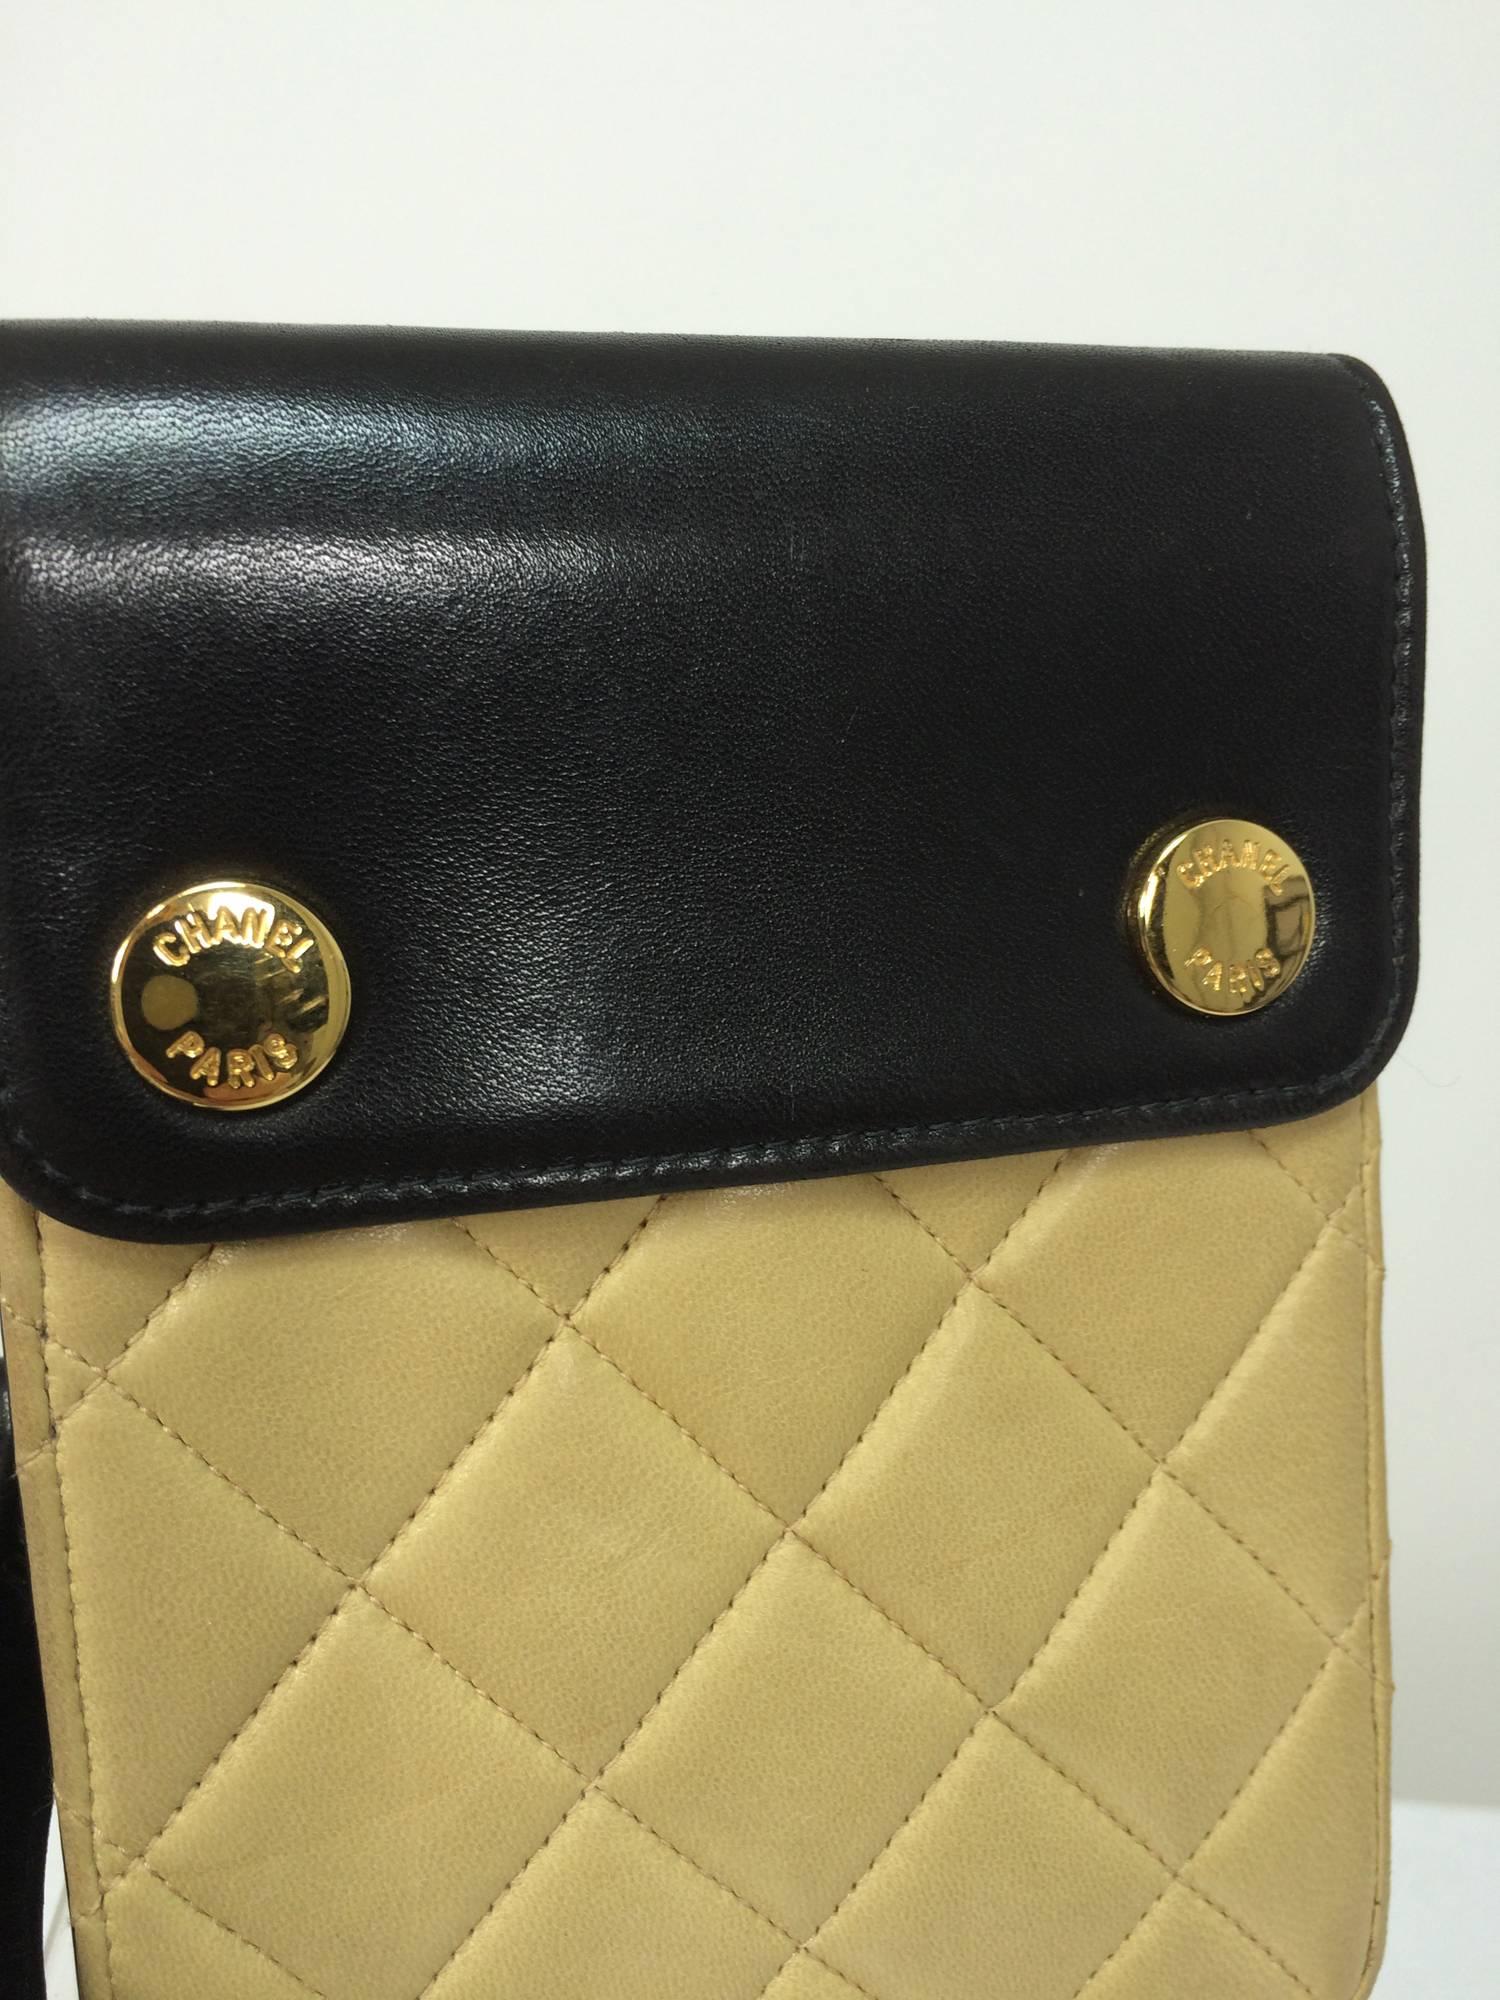 Women's or Men's Chanel quilted Black & Tan lambskin leather GH 2 way mini pouch shoulder bag